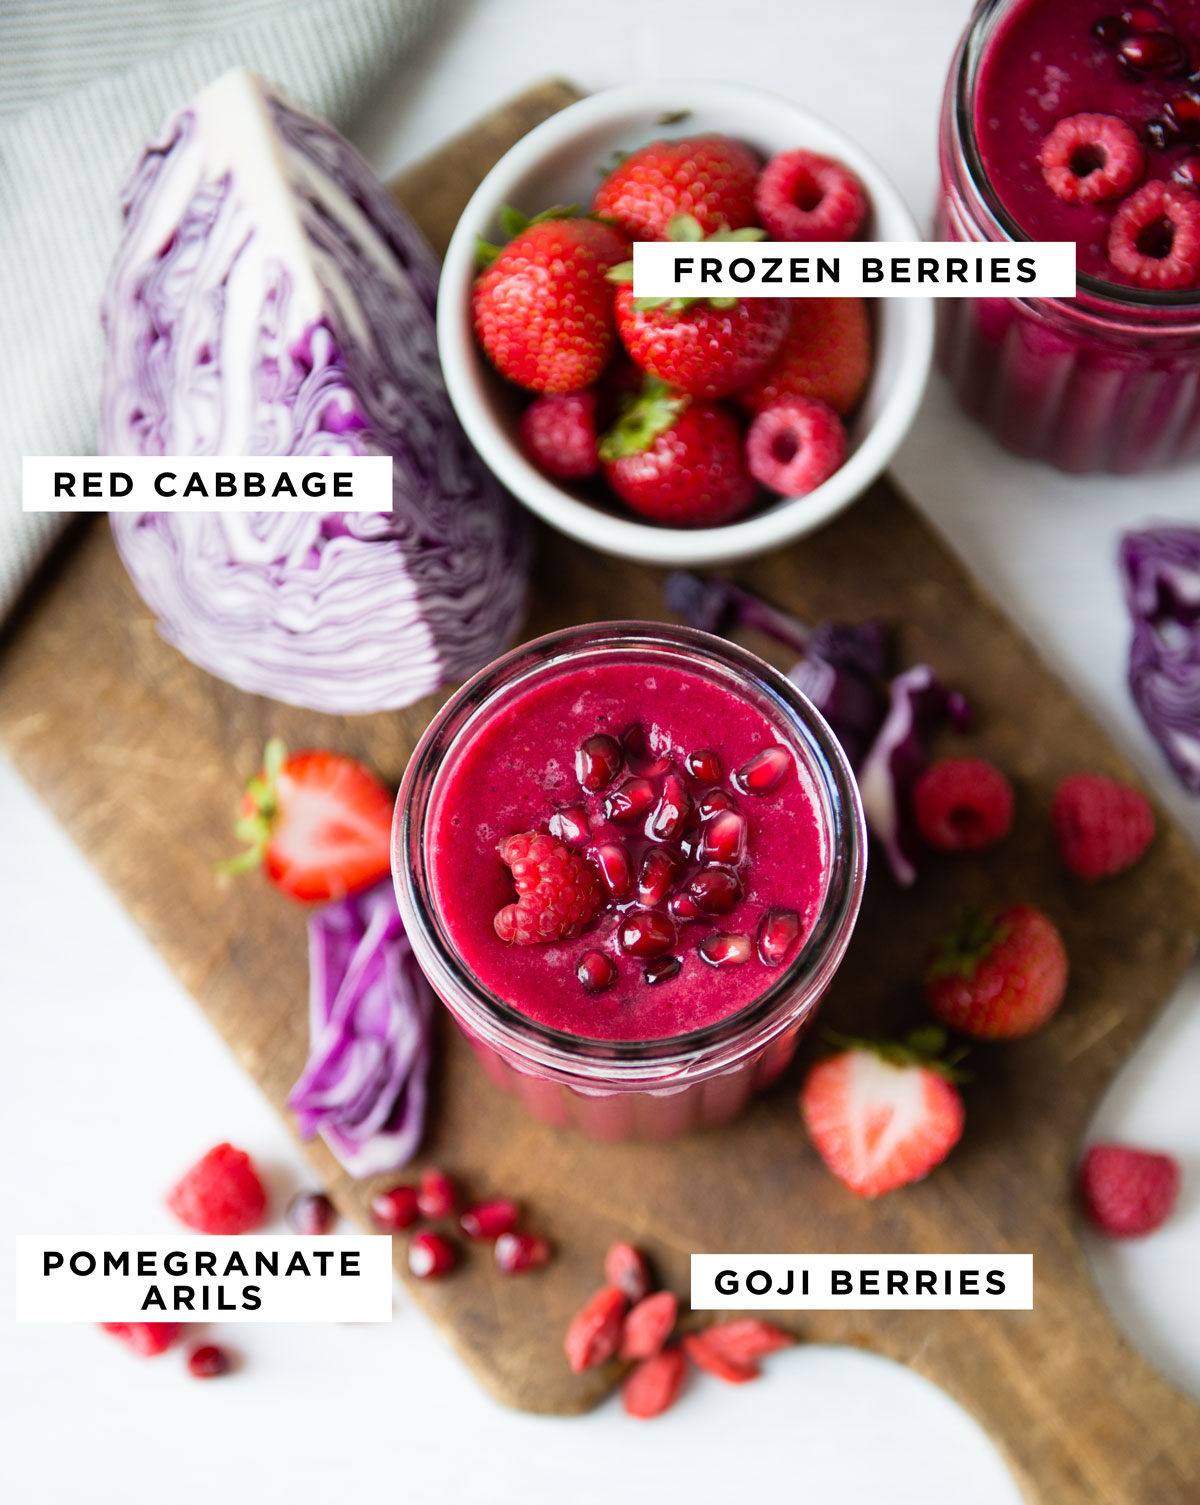 labeled ingredients for a red fruit smoothie including frozen berries, red cabbage, pomegranate arils and goji berries.